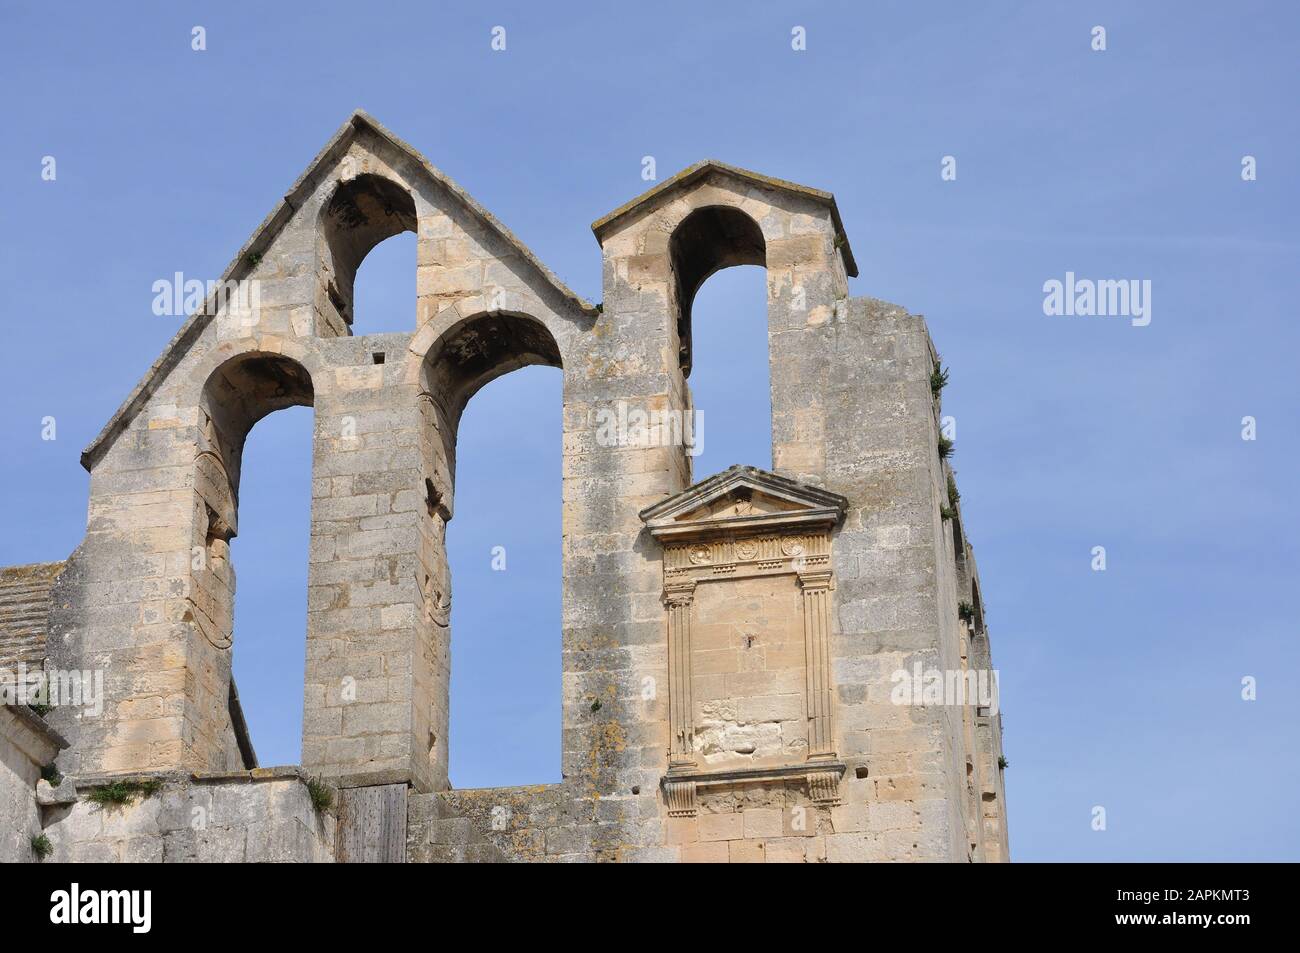 religious monument. spiritual retreat and reflection in the abbey, France Stock Photo